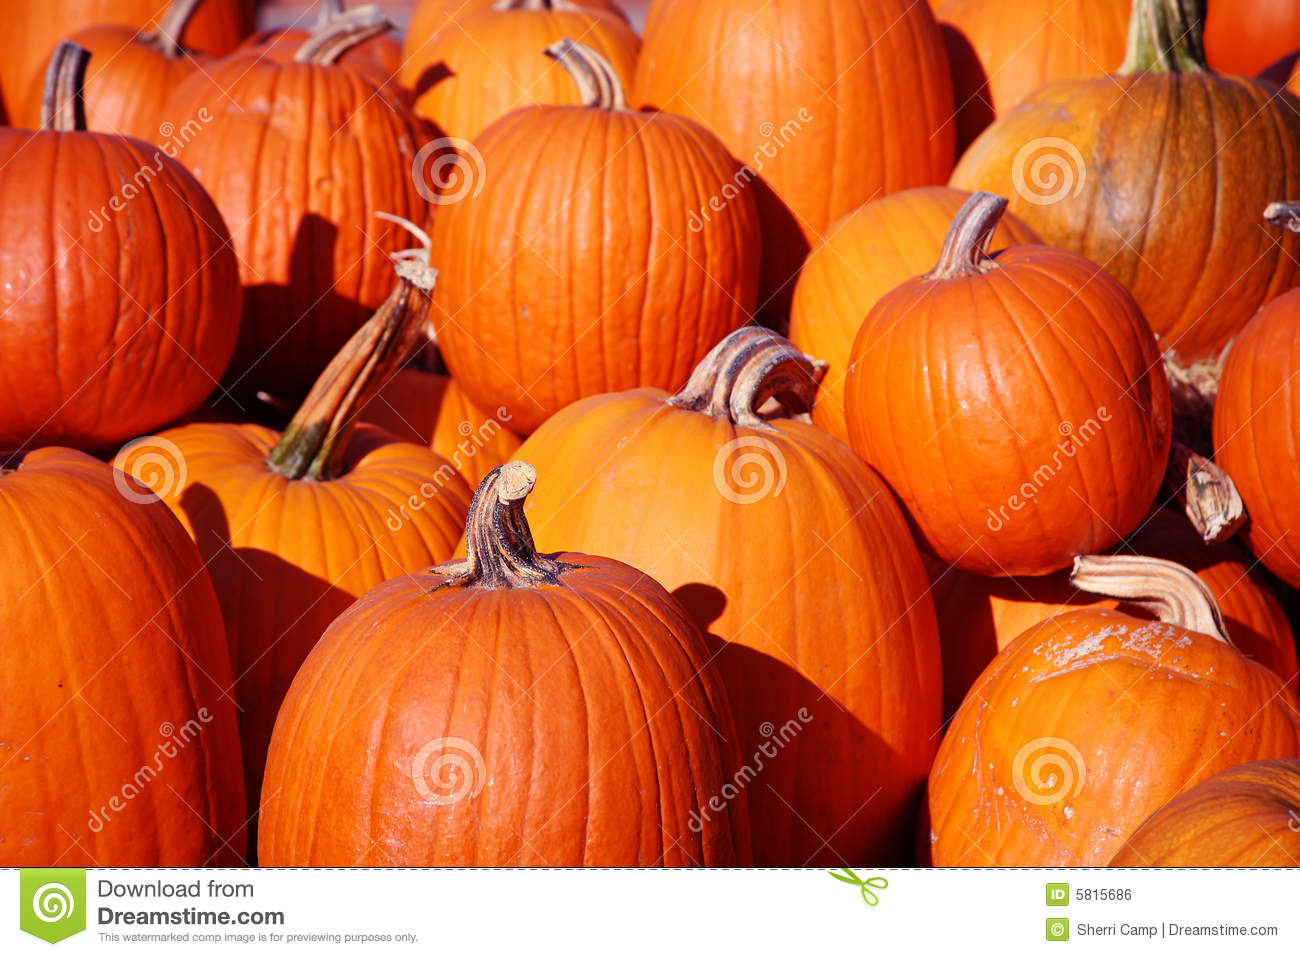 Pumpkins Stacked Up Royalty Free Stock Image   Image  5815686